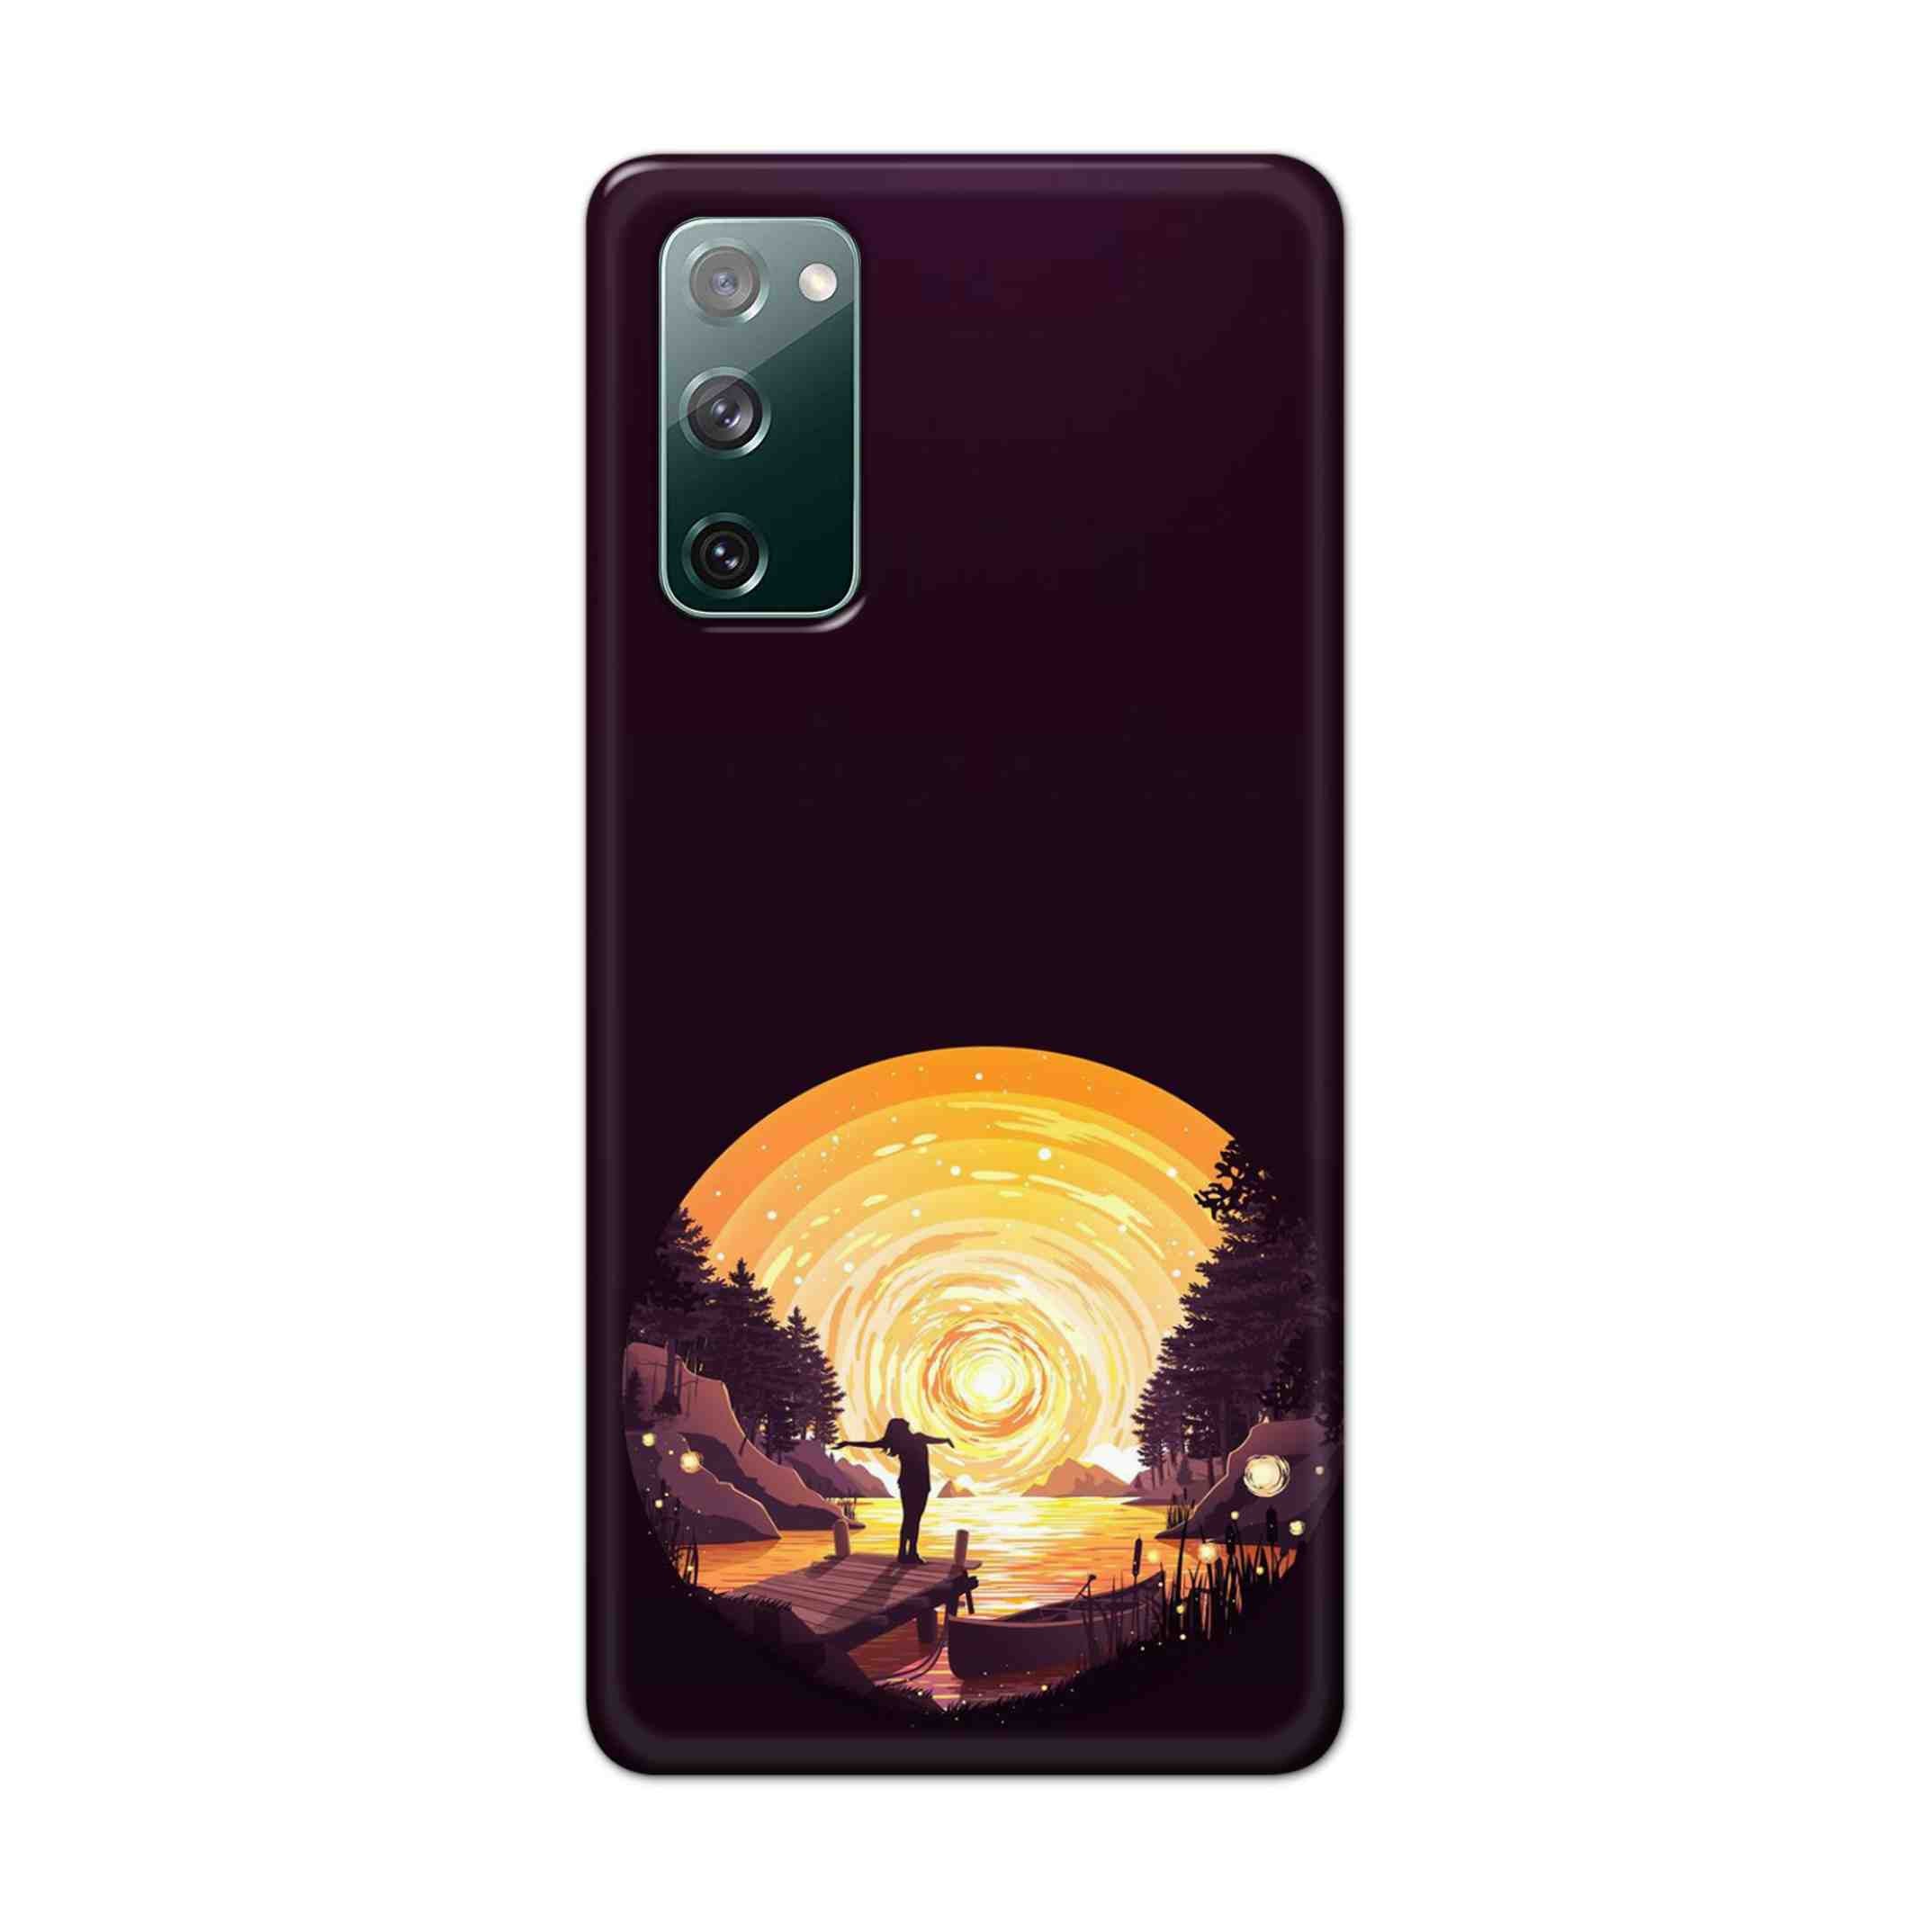 Buy Night Sunrise Hard Back Mobile Phone Case Cover For Samsung Galaxy S20 FE Online